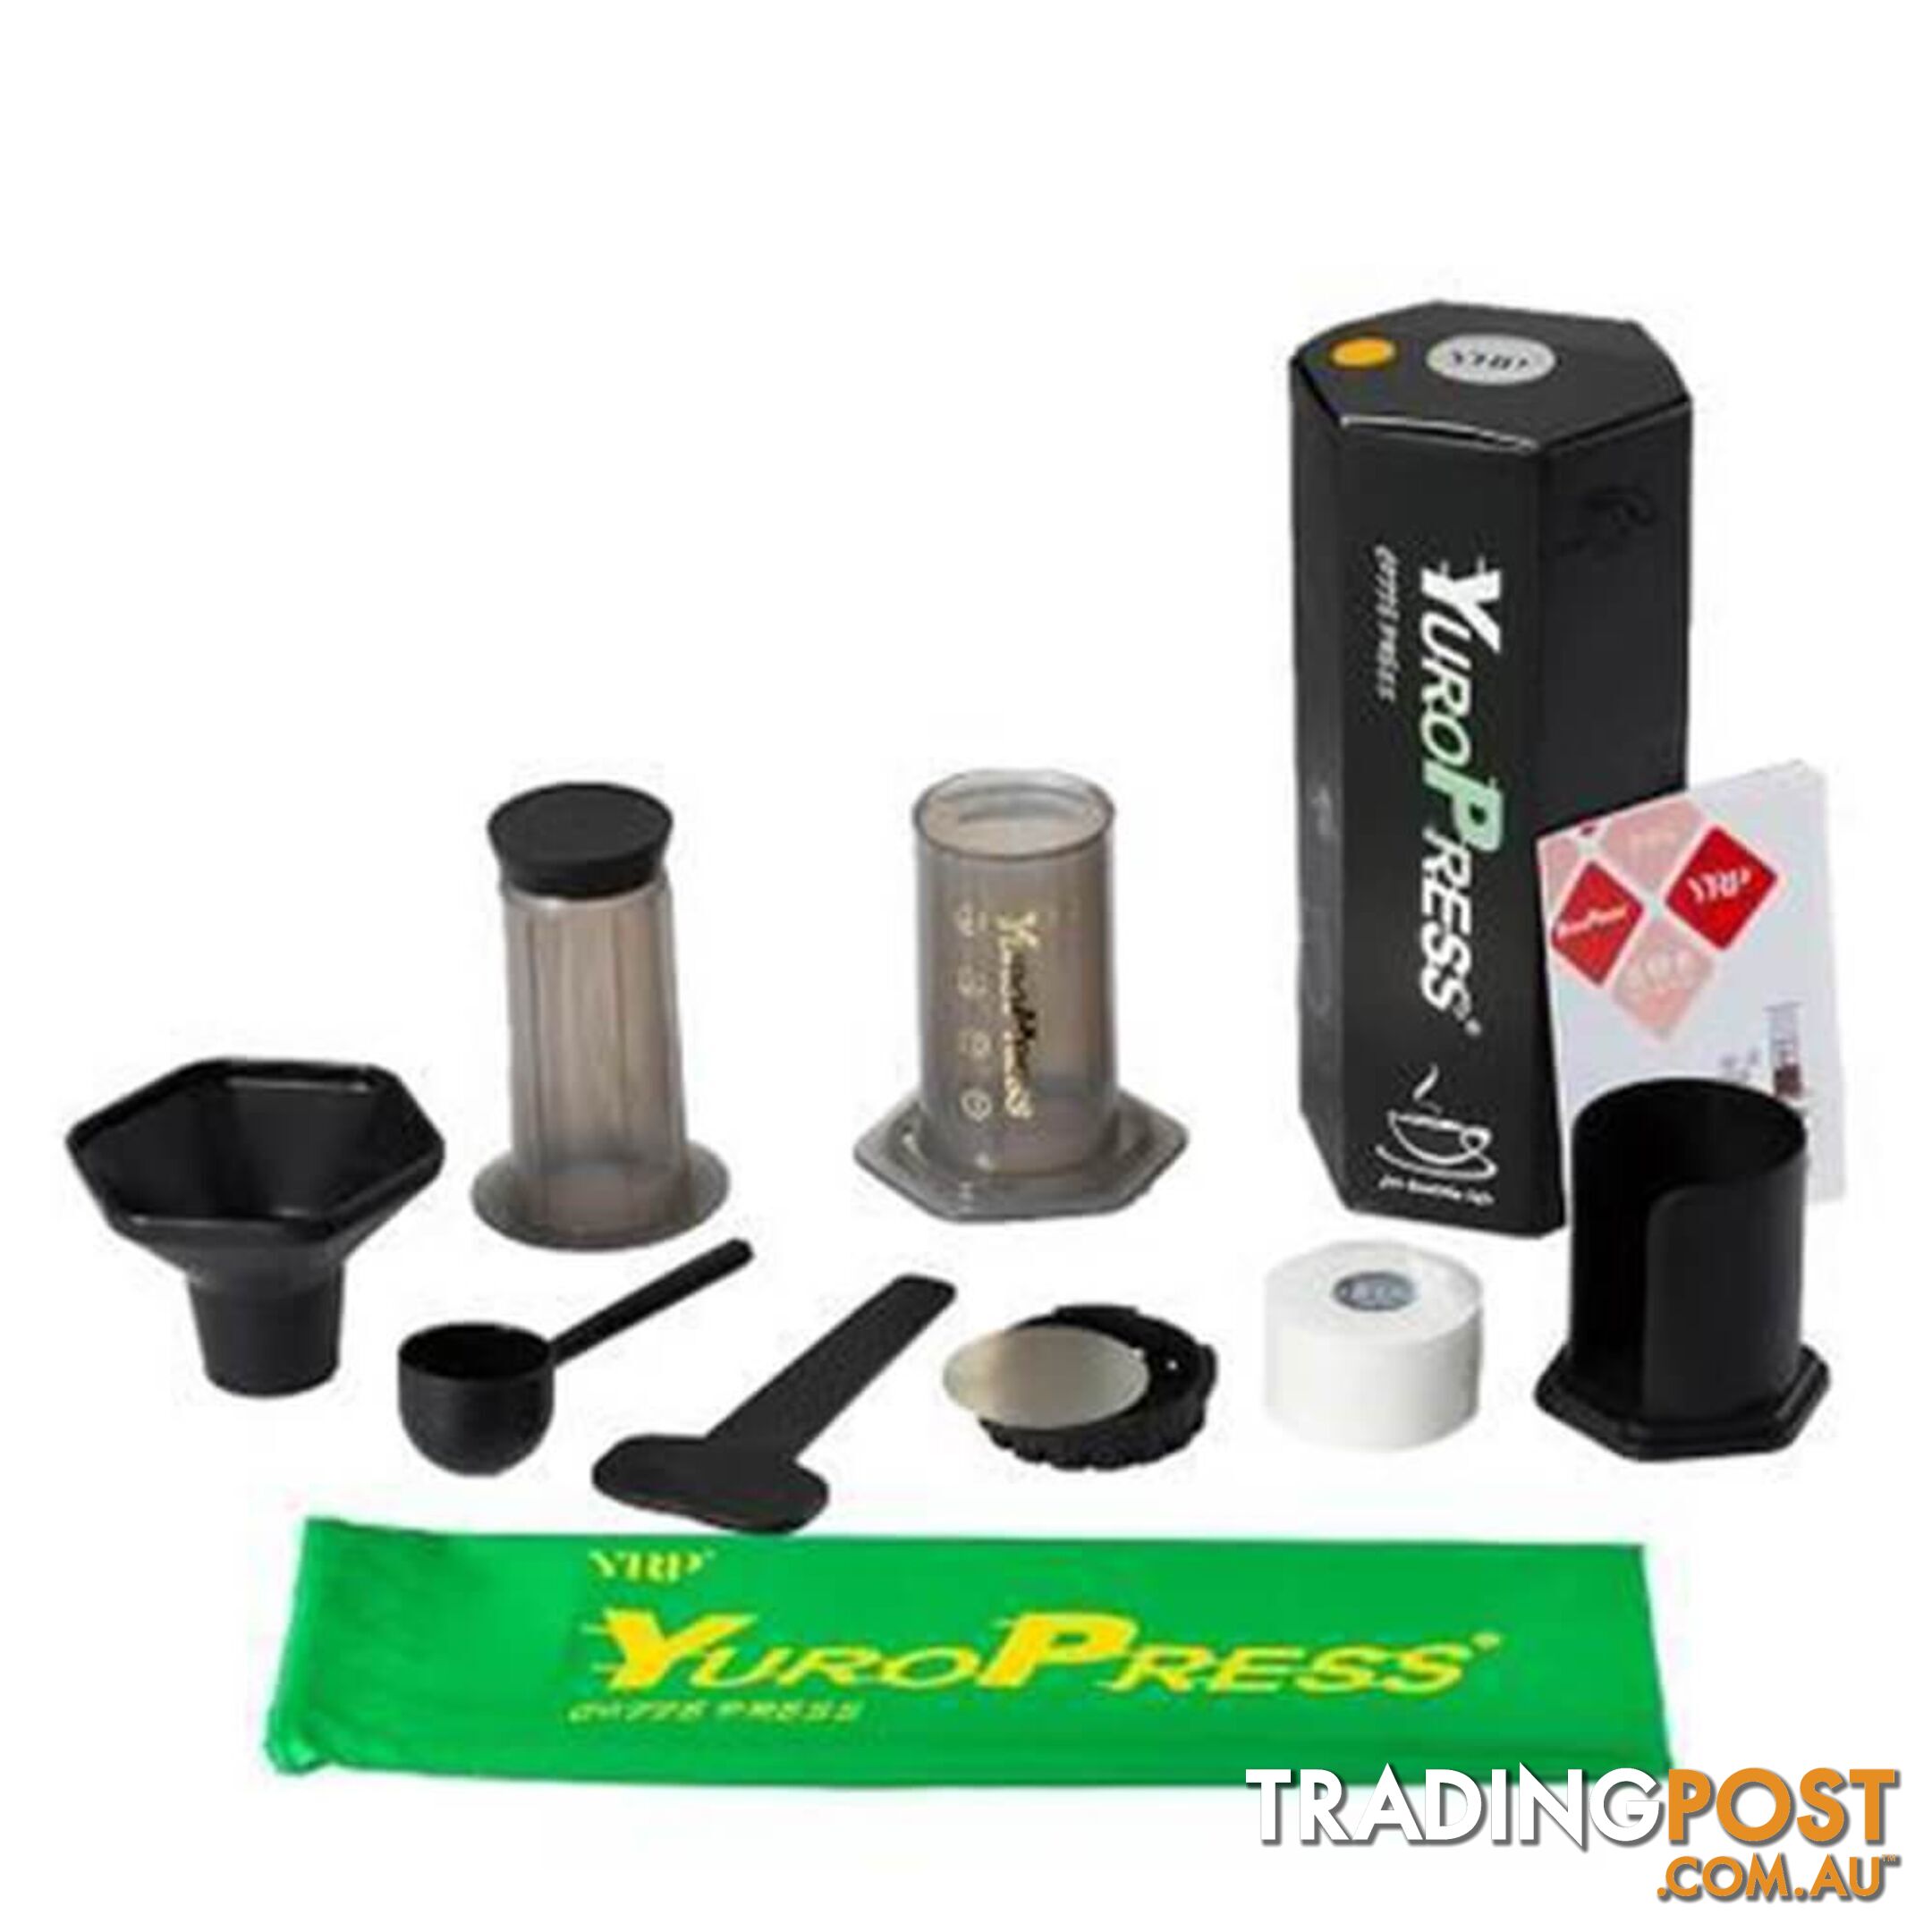 Coffee & Expresso Maker Kit With 350 Filters - 100% Genuine - Unbranded - 787976599508